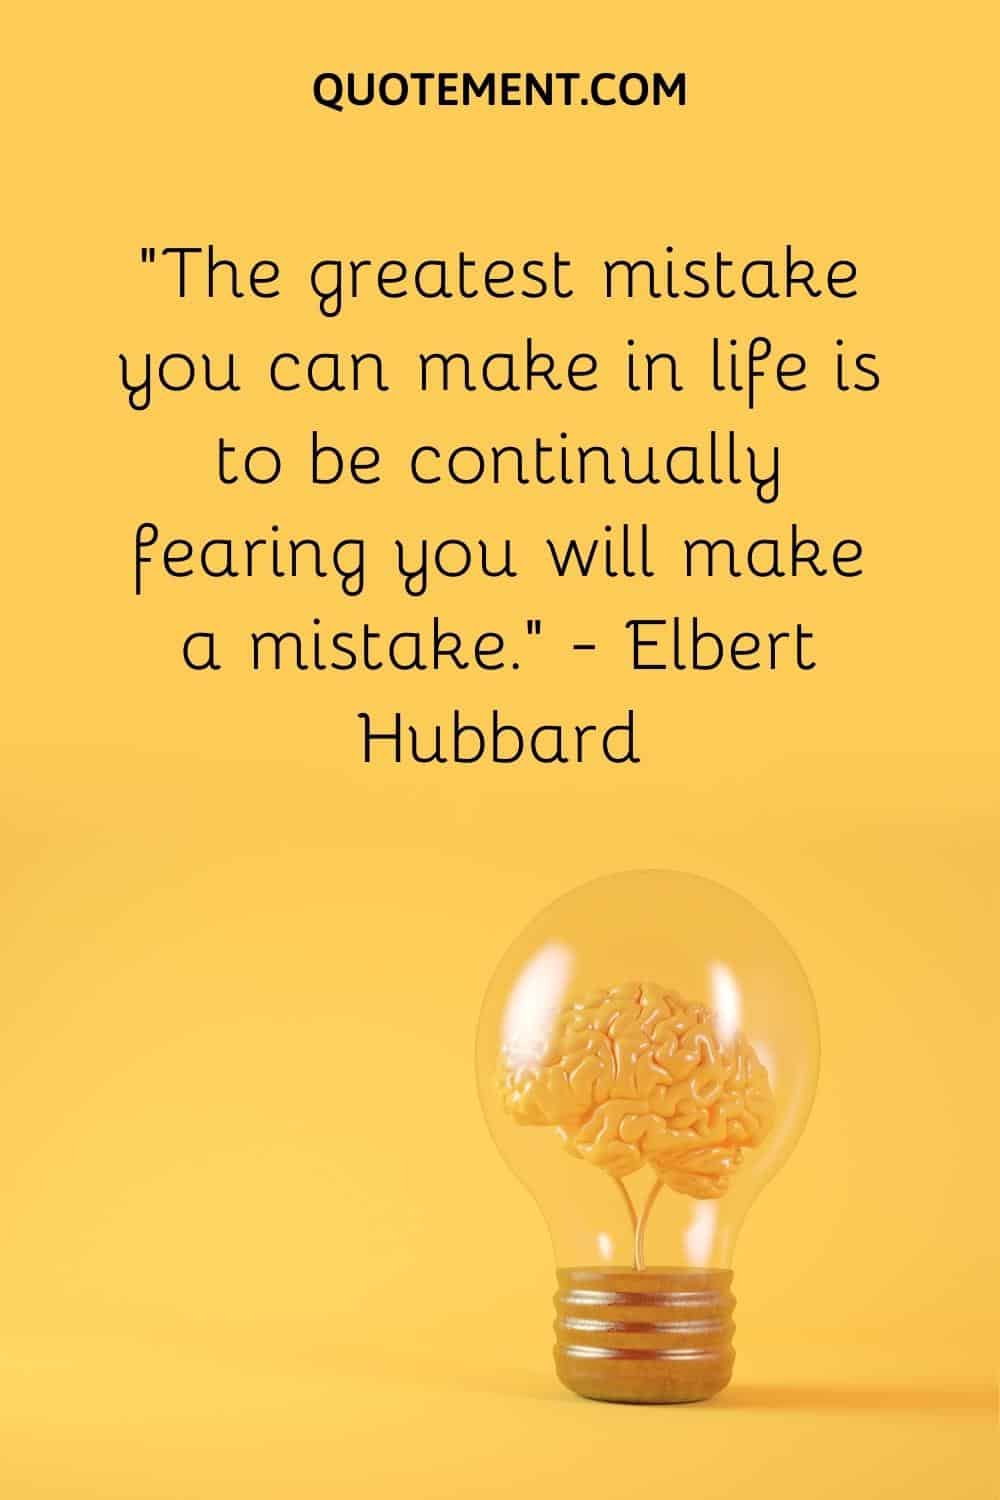 “The greatest mistake you can make in life is to be continually fearing you will make a mistake.” — Elbert Hubbard